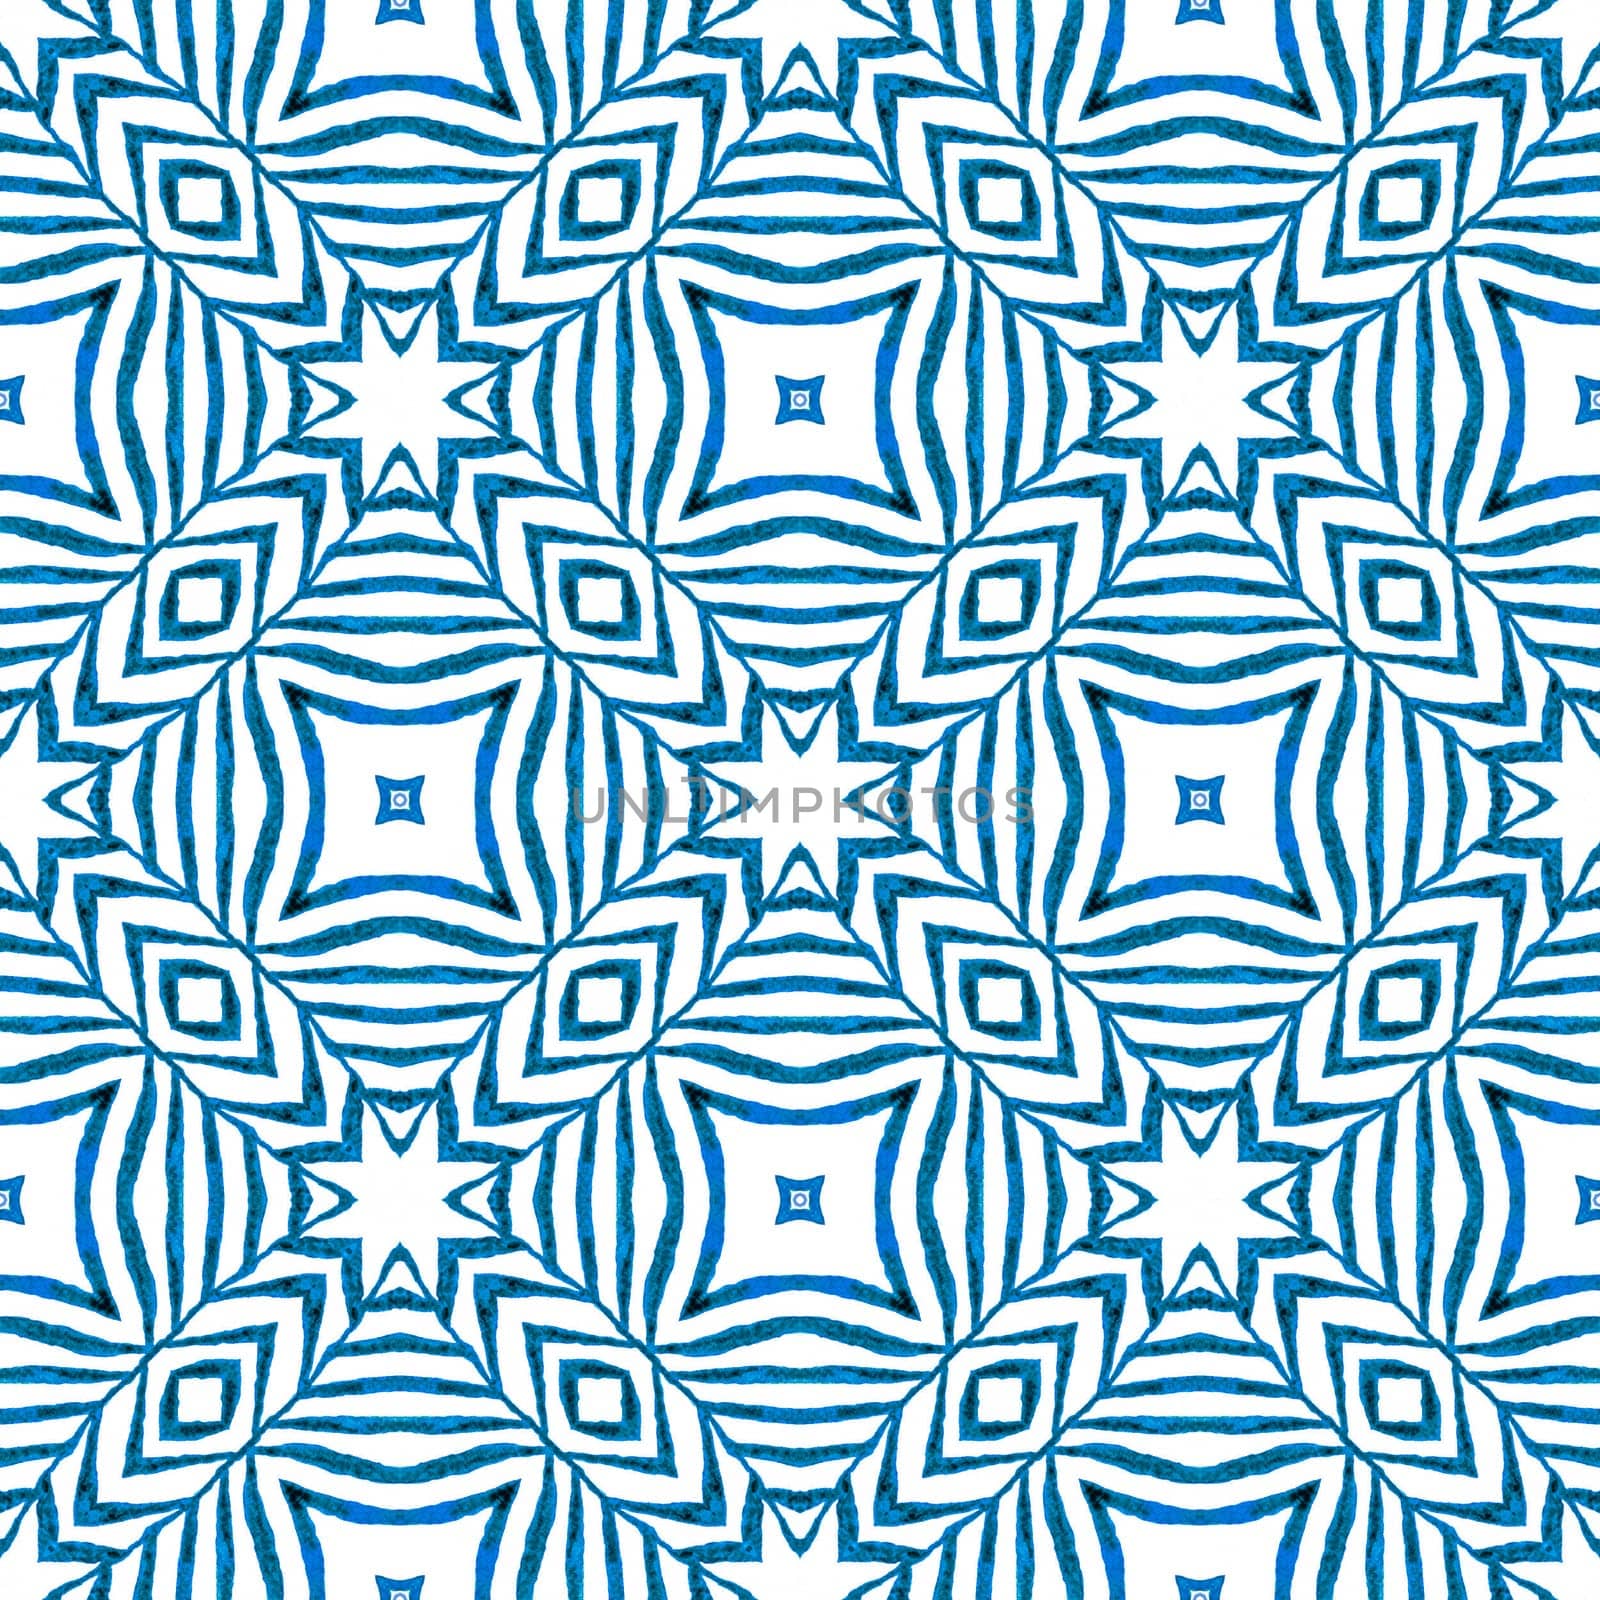 Textile ready superb print, swimwear fabric, wallpaper, wrapping. Blue delightful boho chic summer design. Hand drawn tropical seamless border. Tropical seamless pattern.